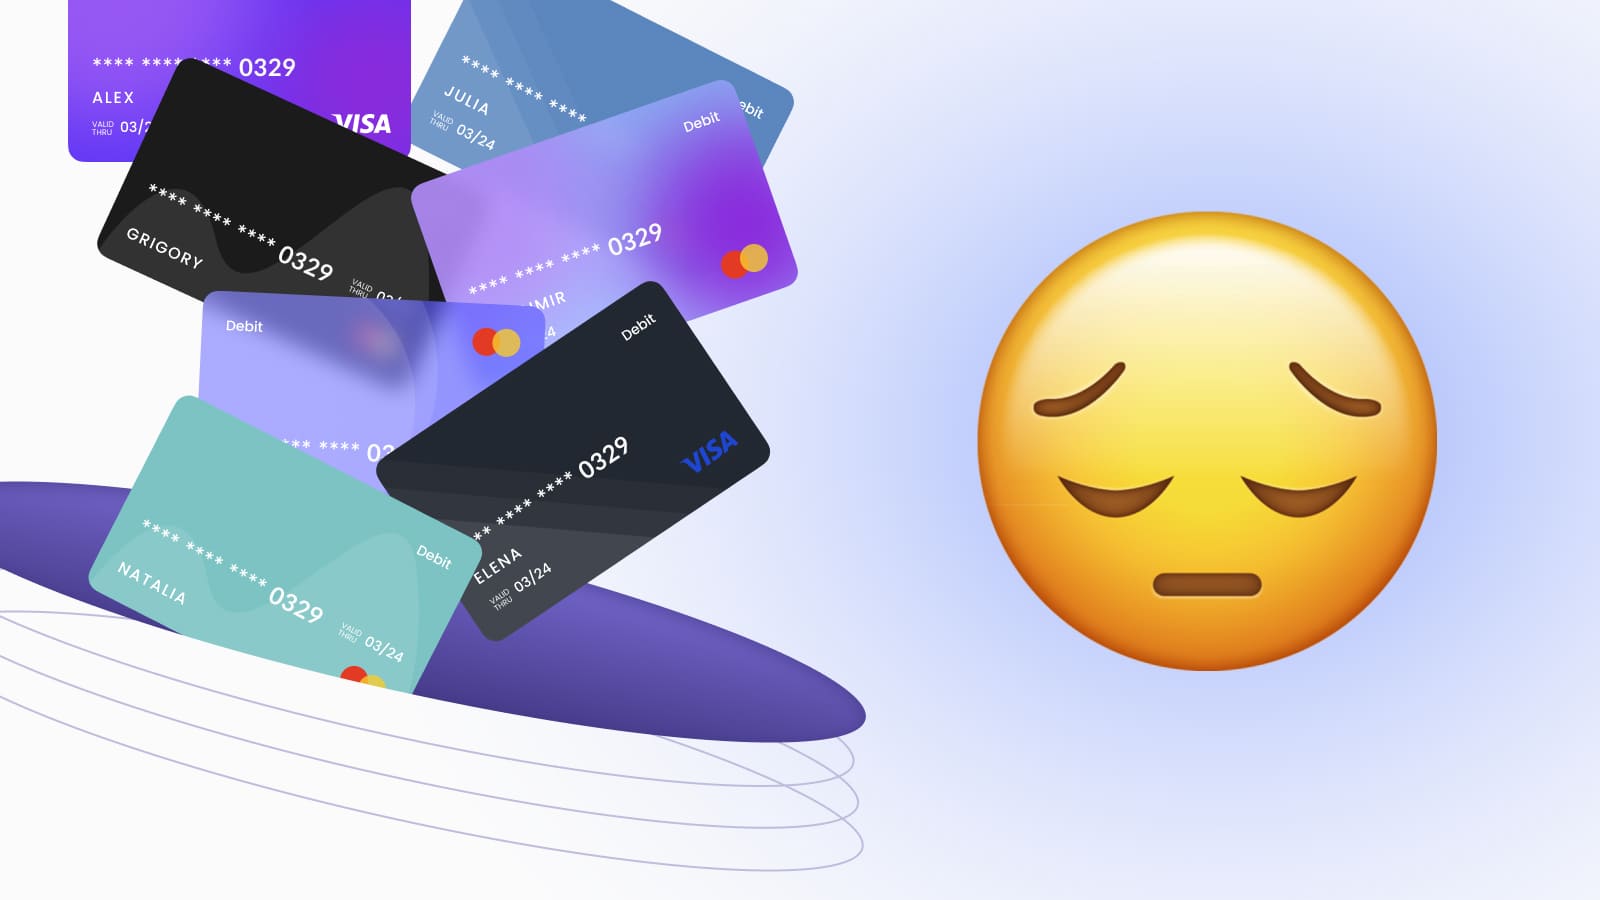 P2P exchange is the solution when bank cards can't facilitate crypto transfers.